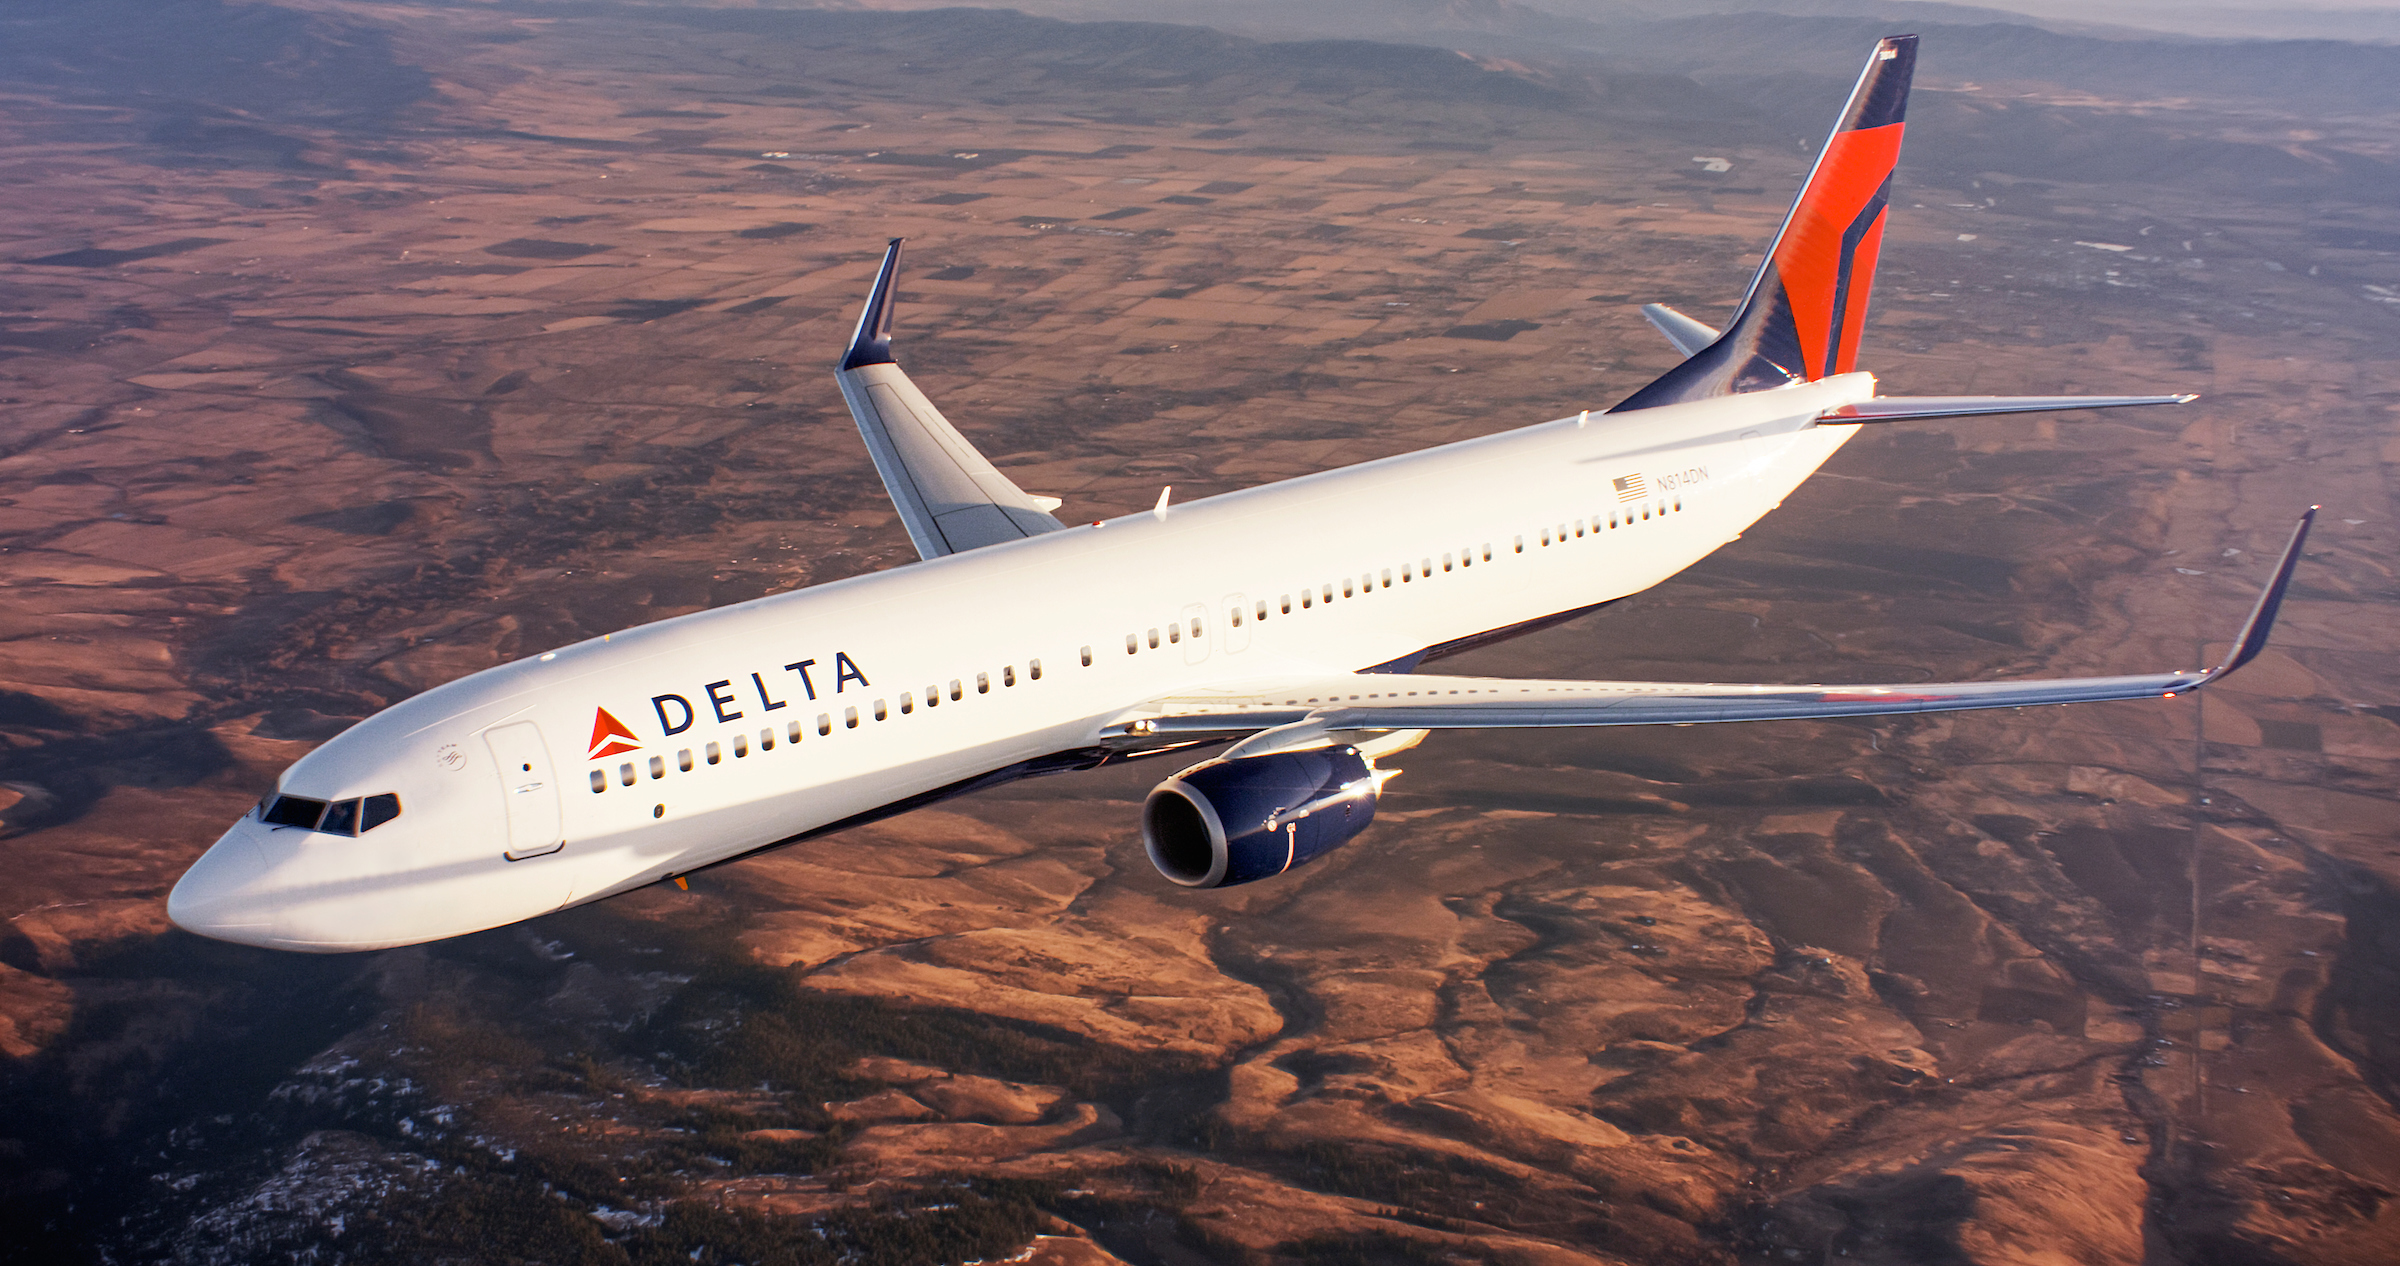 
Does Delta Airline Use Joint Ventures? Here's What You Need To Know...